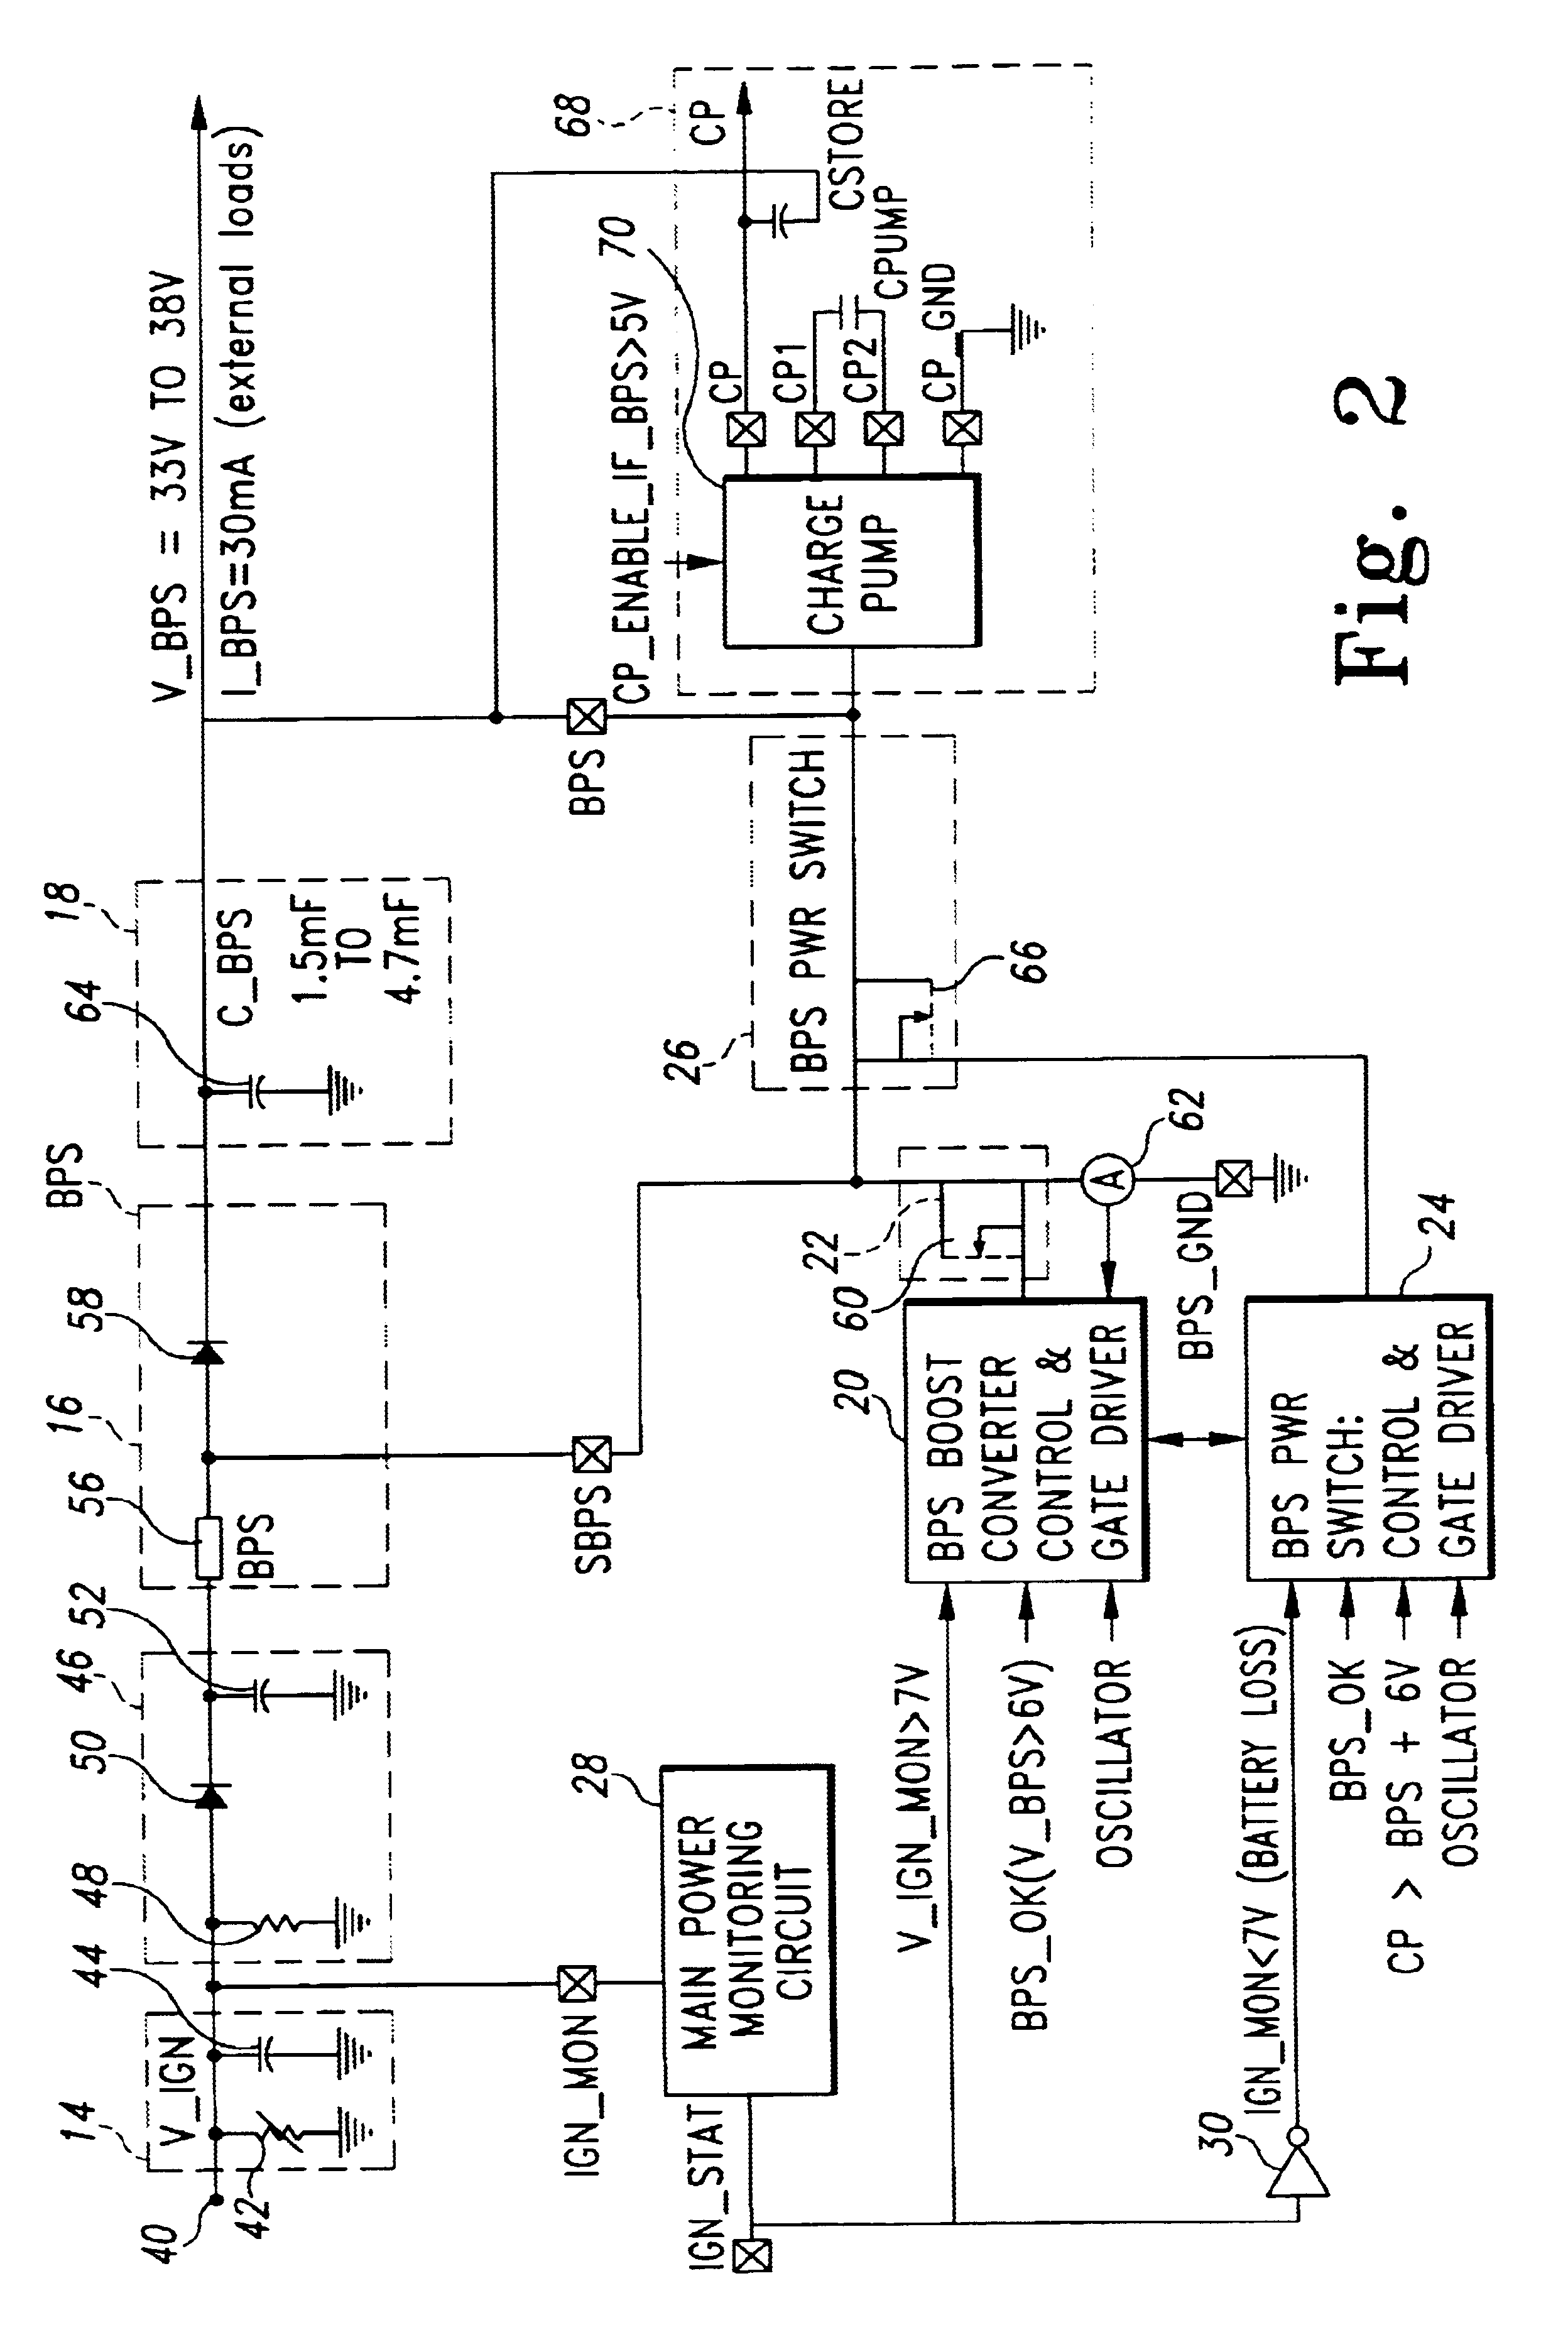 Backup power supply for restraint control module